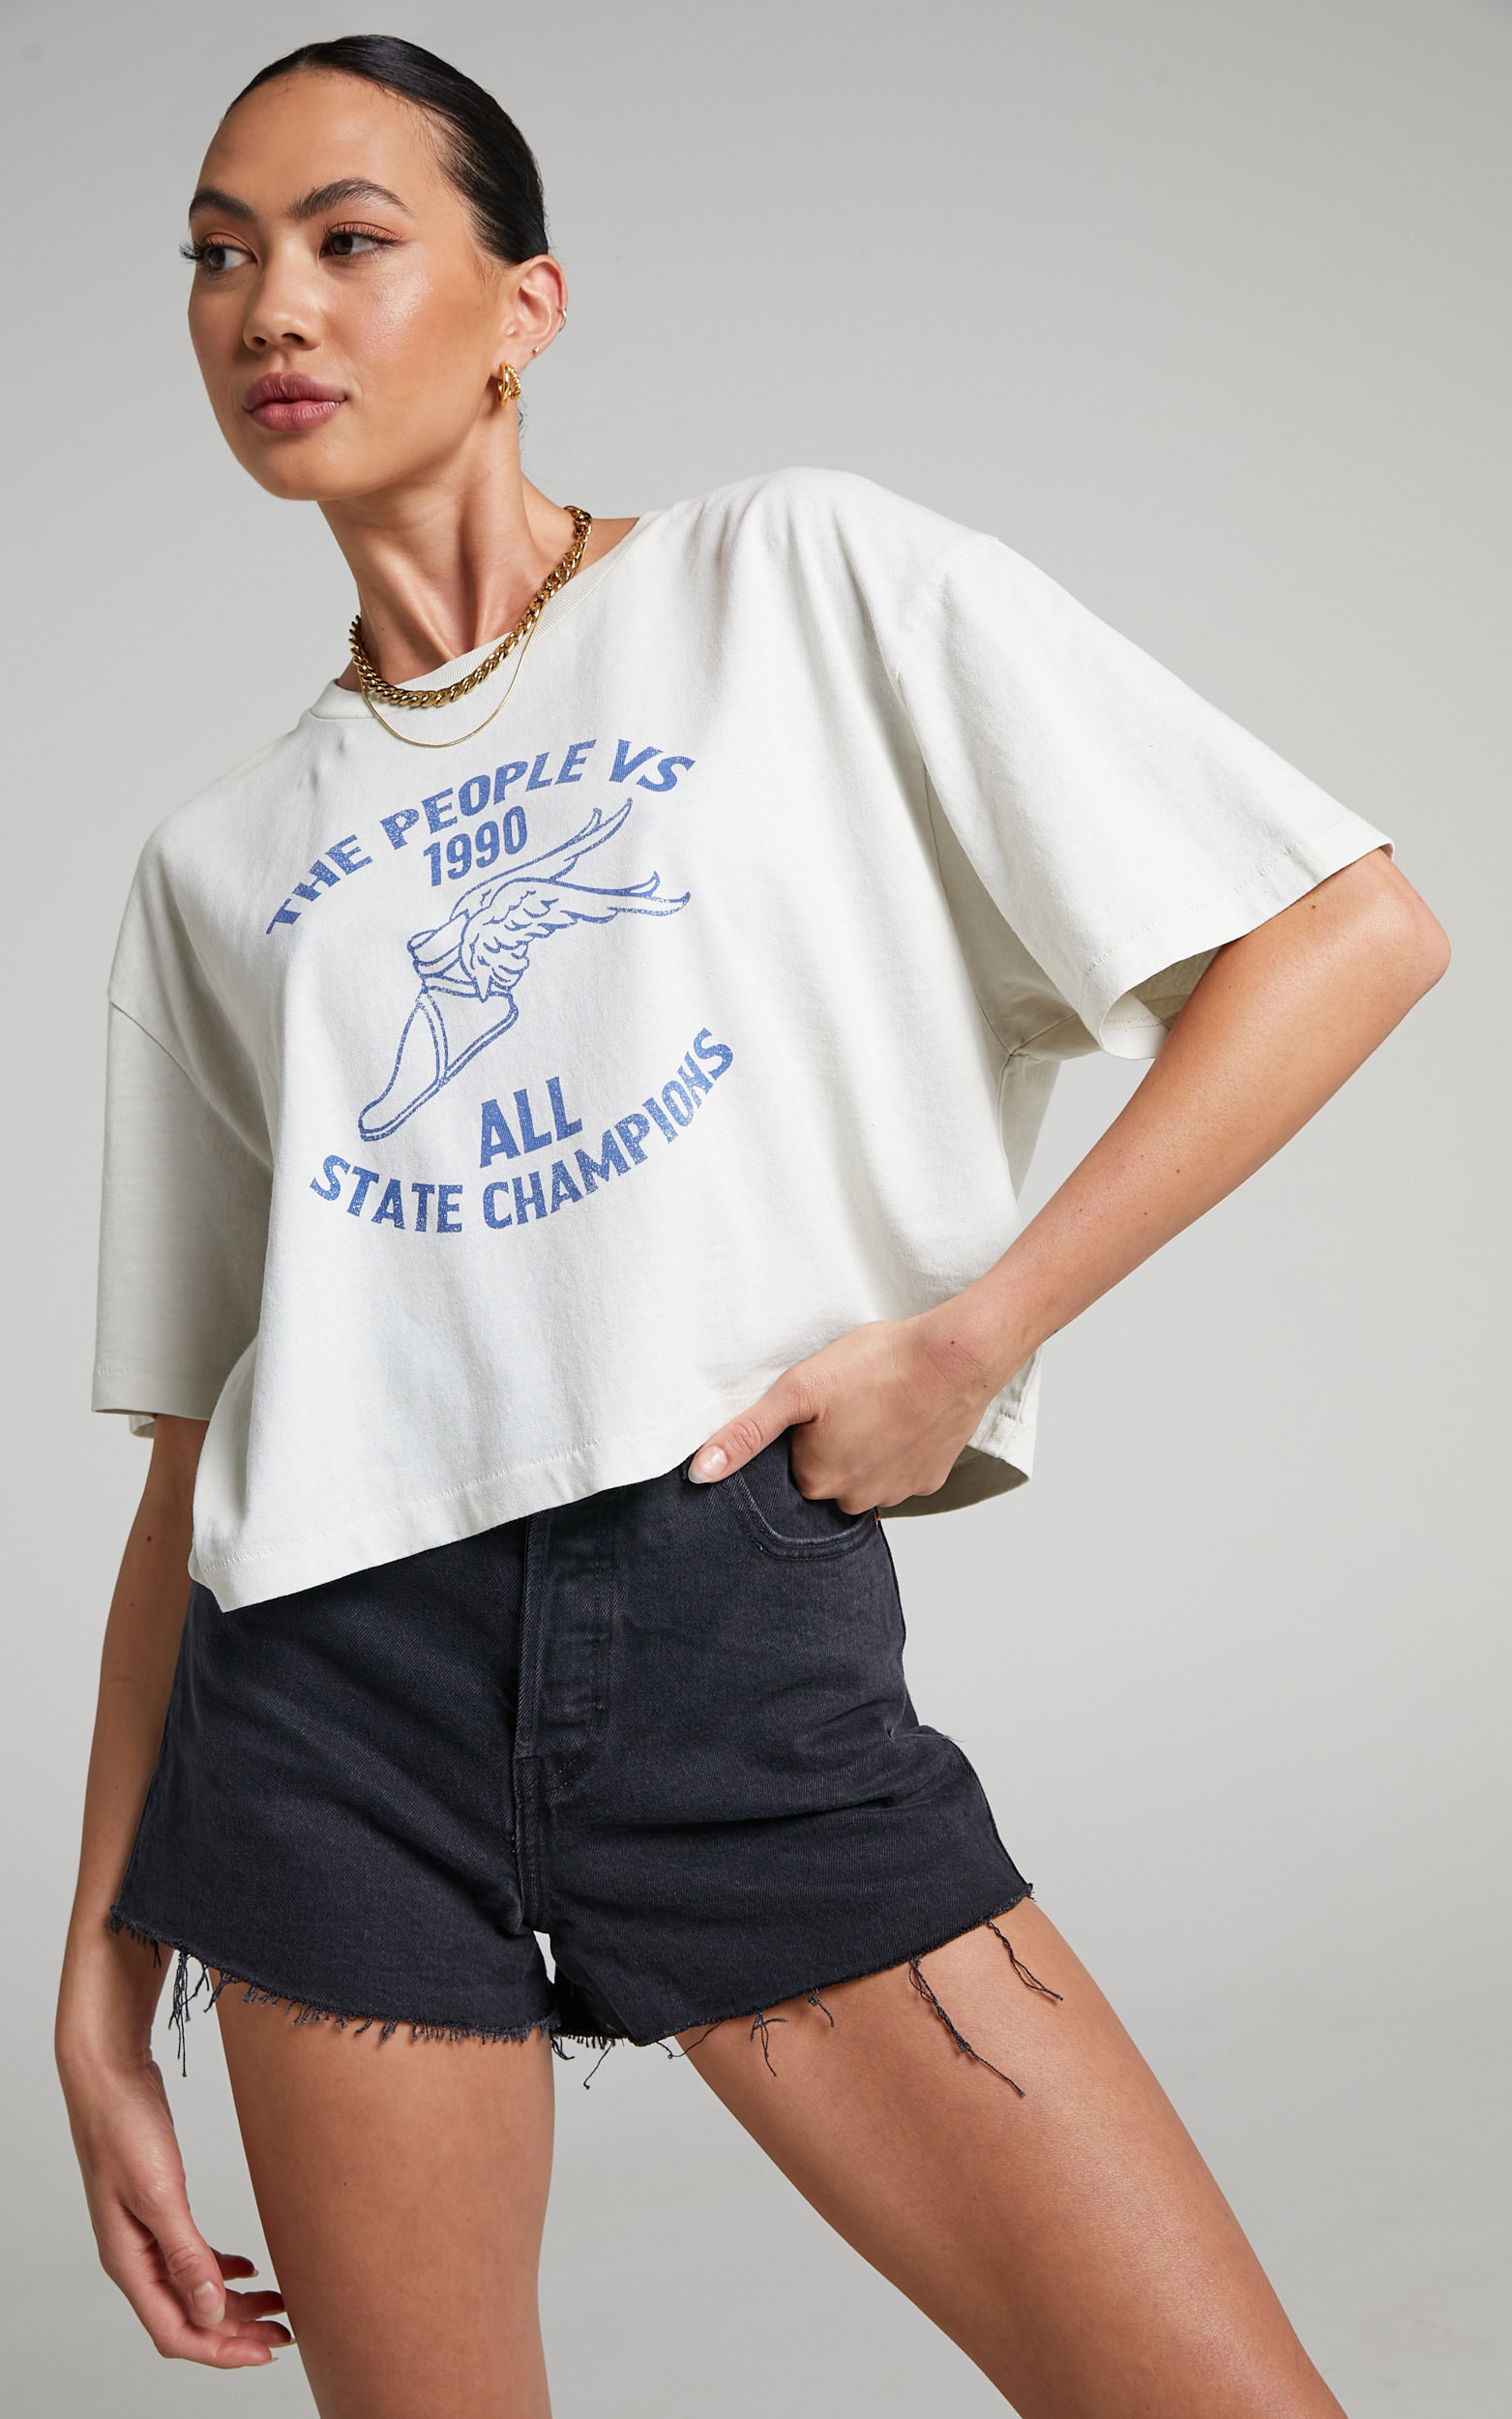 The People Vs - Athletica Crop Tee in Antique White - XS, WHT1, hi-res image number null